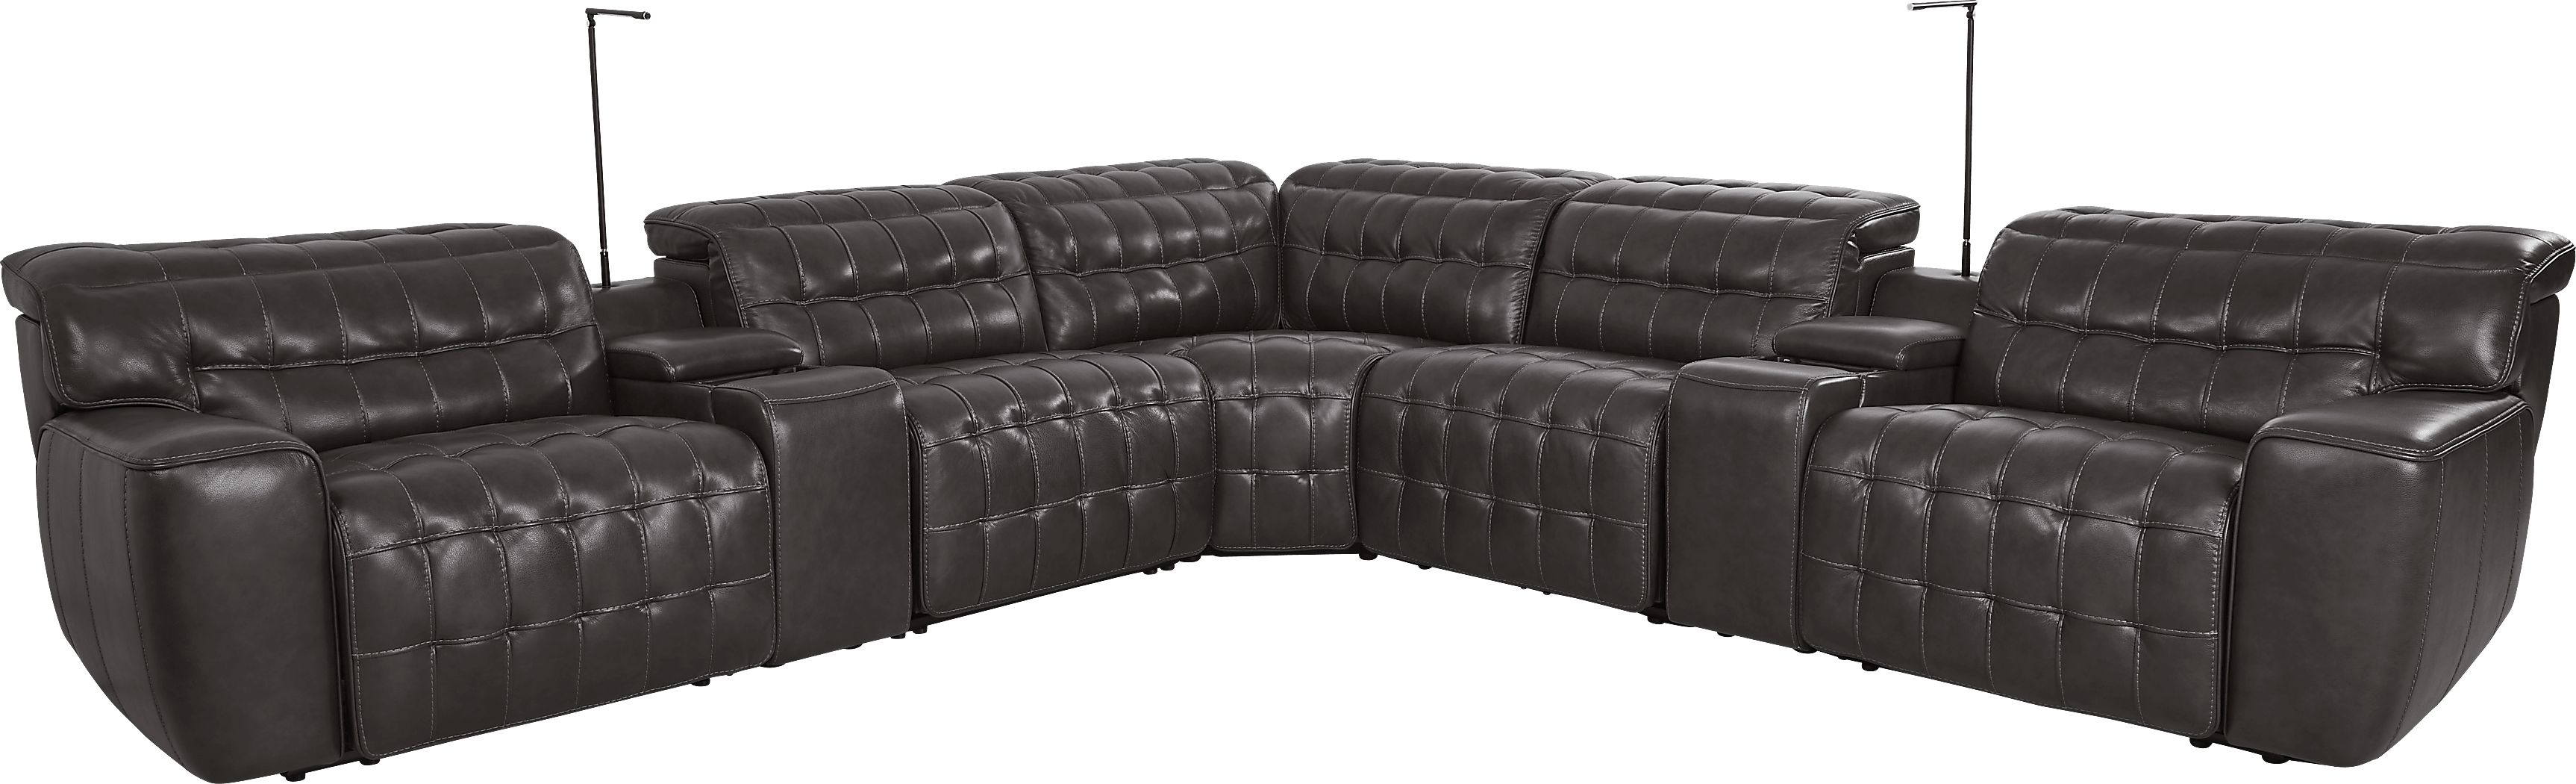 Maddox Manor Dark Gray Leather 10 Pc Dual Power Reclining Sectional Living Room